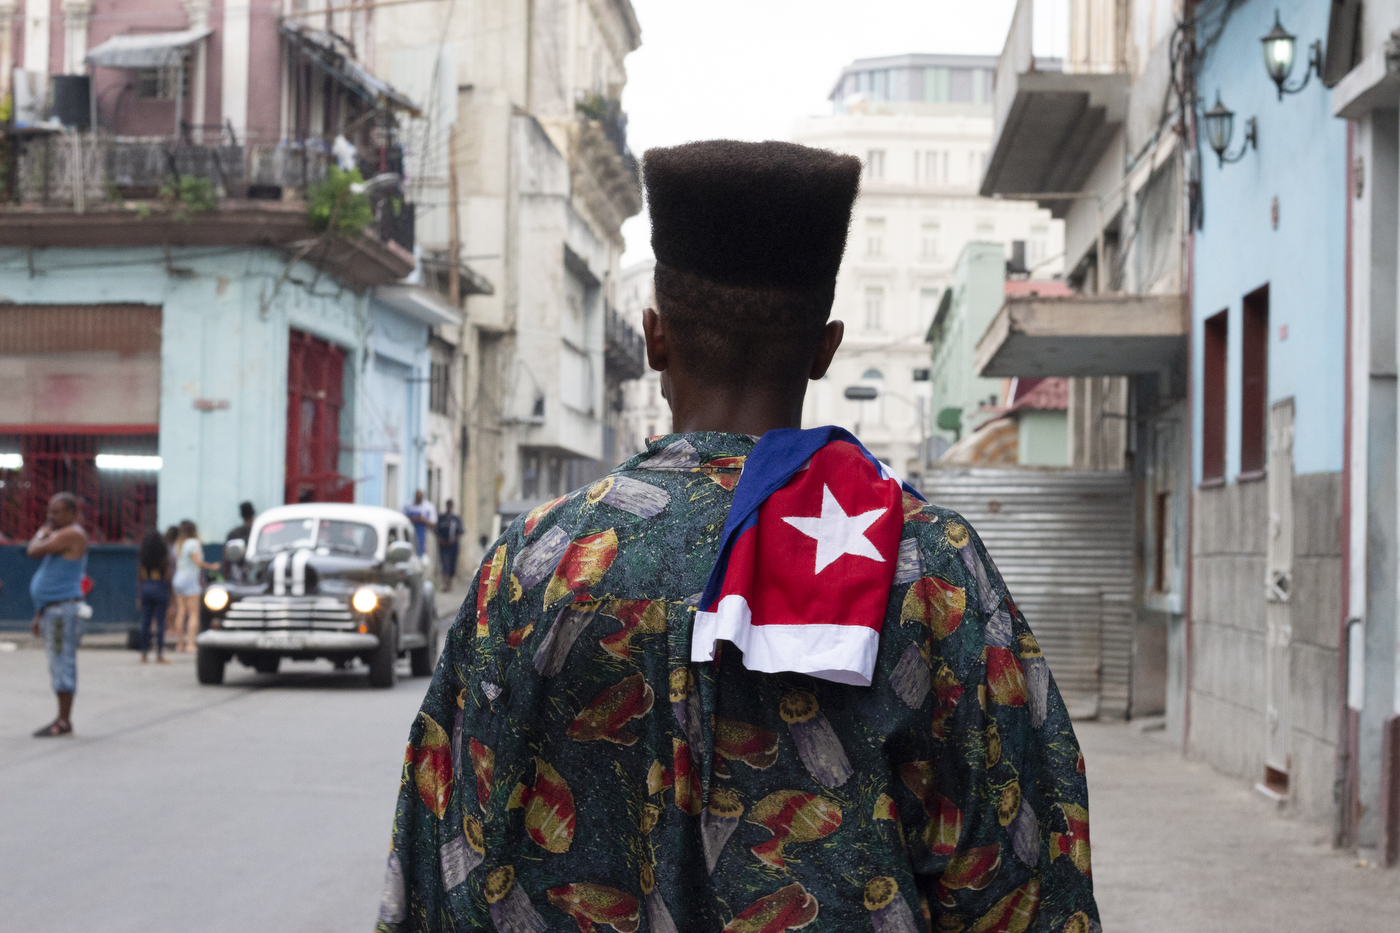 More than two-dozen Northeastern students immersed themselves in Cuban culture while learning the nuances of street photography.